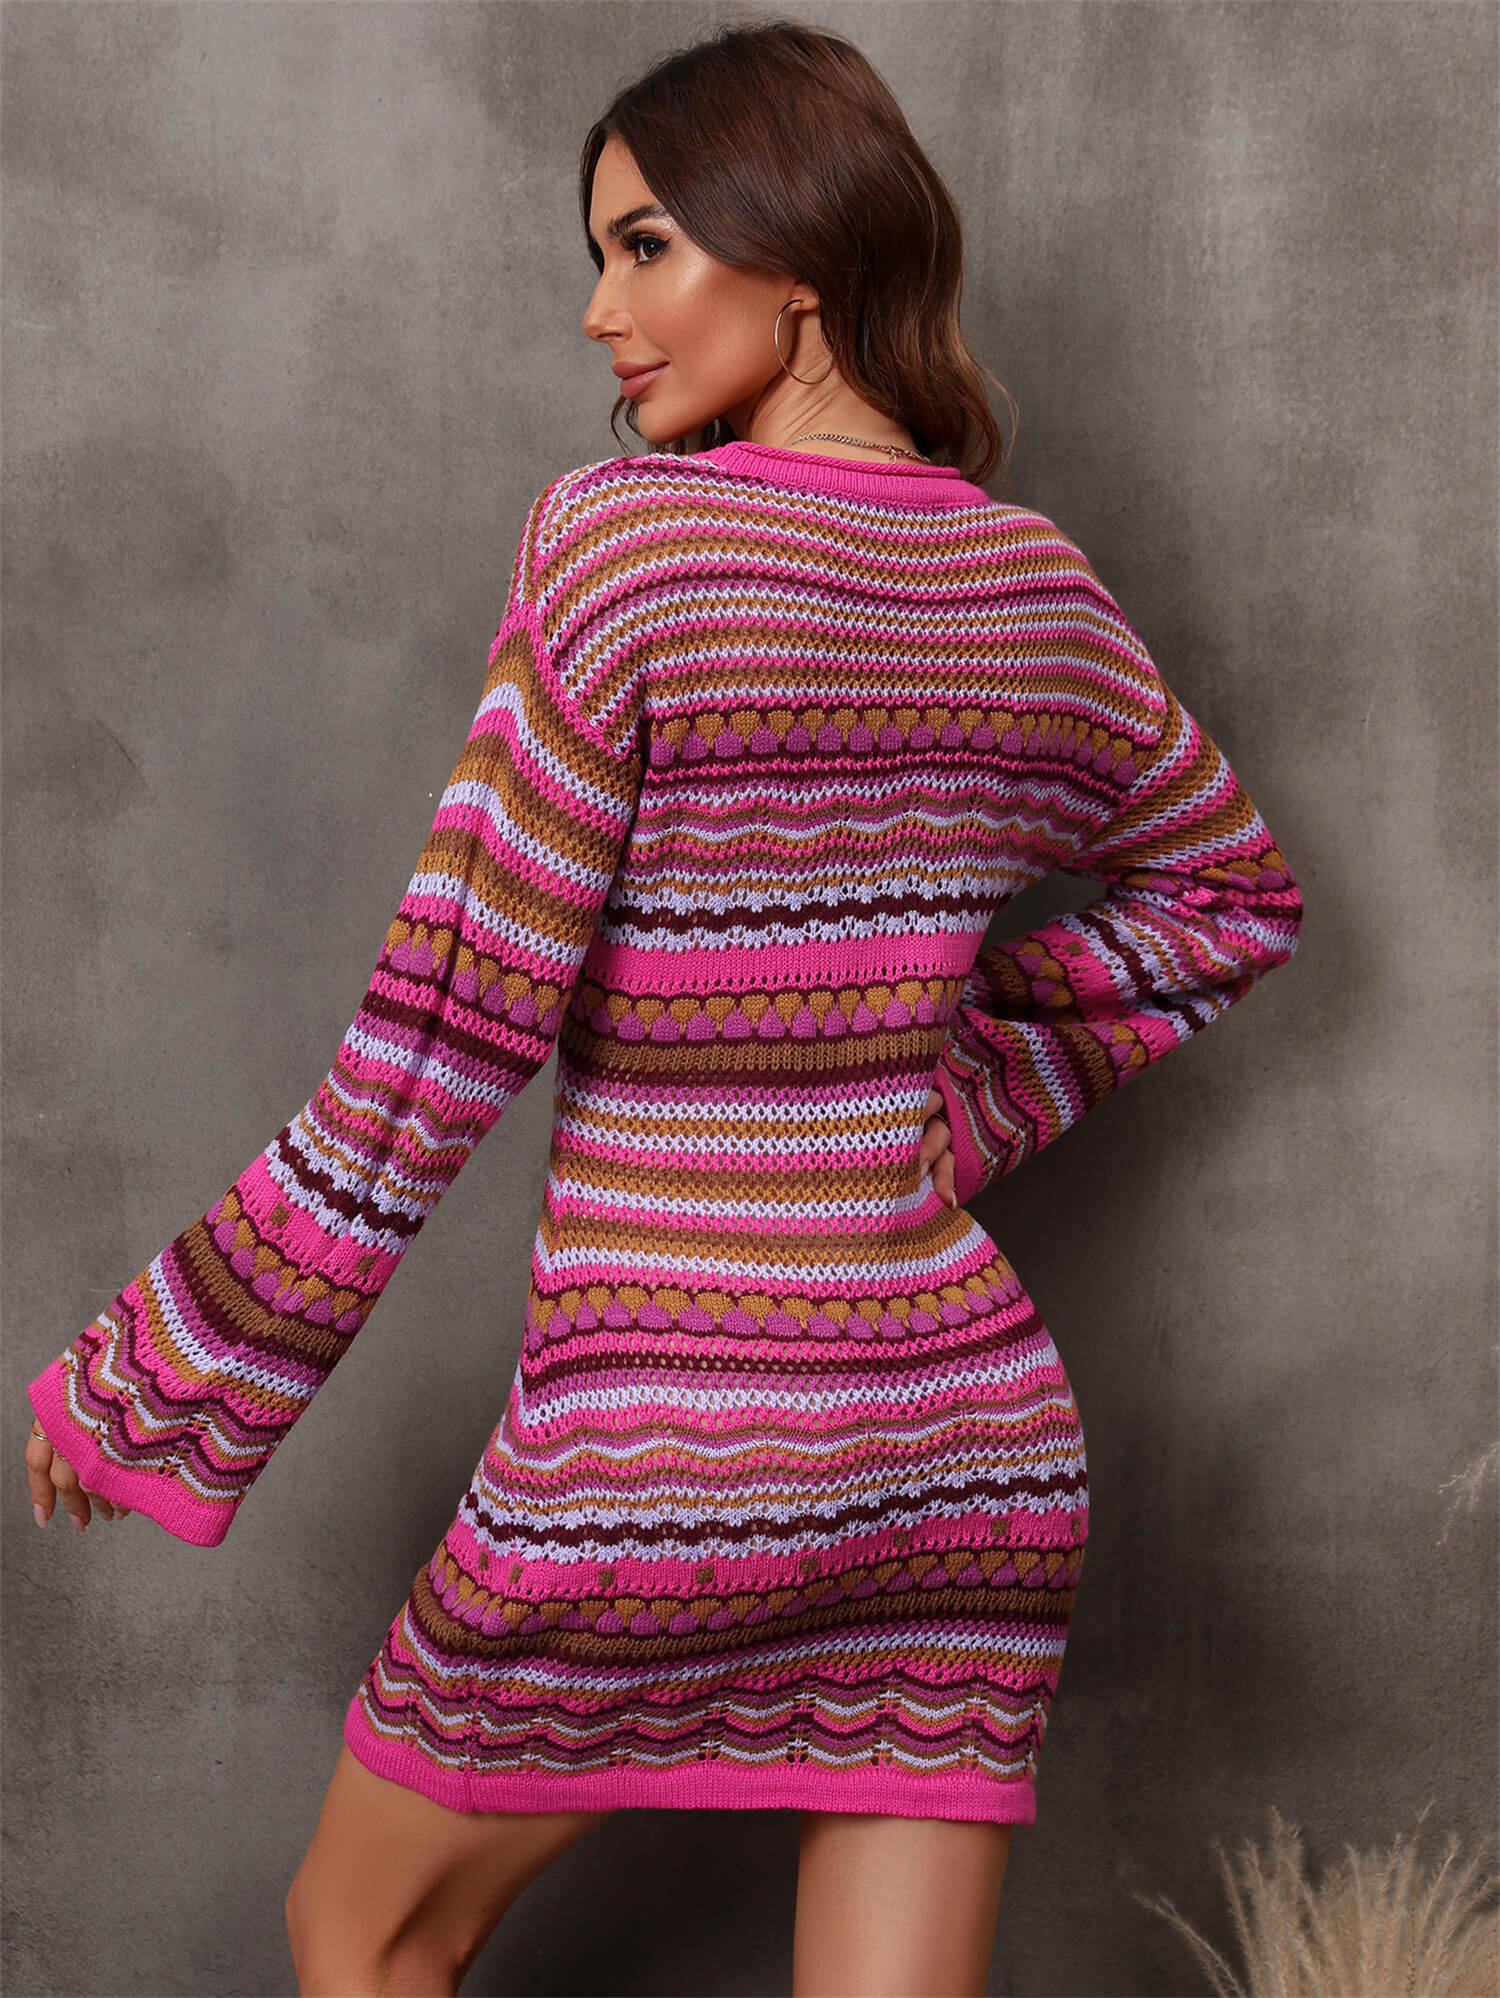 Multicolored Stripe Dropped Shoulder Sweater Dress - Fashion Girl Online Store